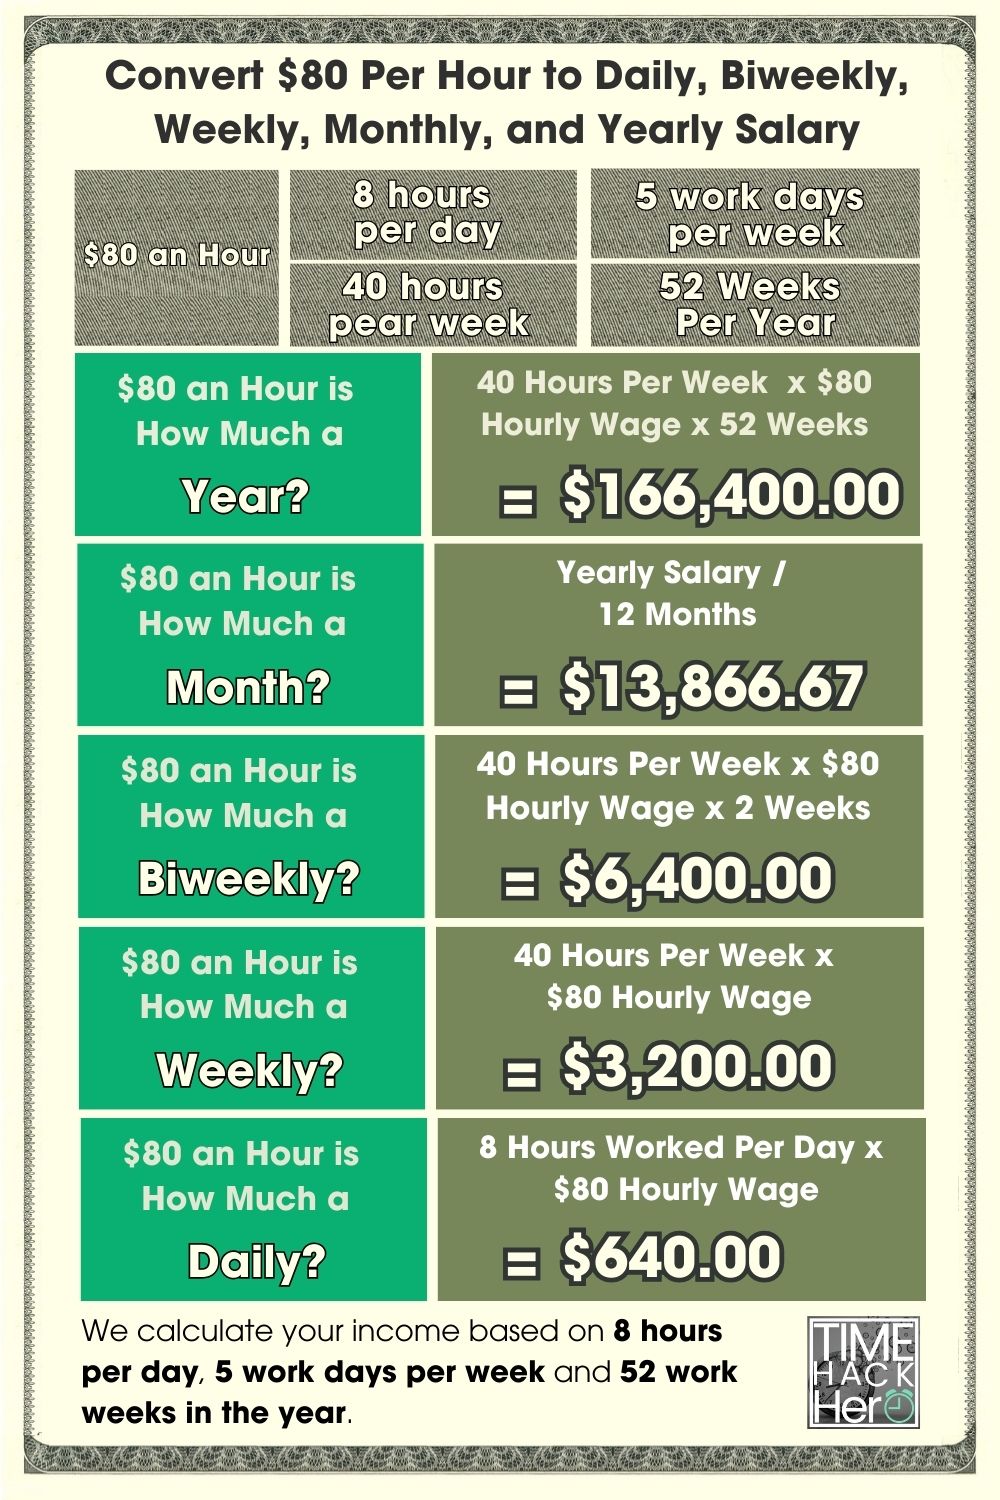 Convert $80 Per Hour to Daily, Biweekly, Weekly, Monthly, and Yearly Salary